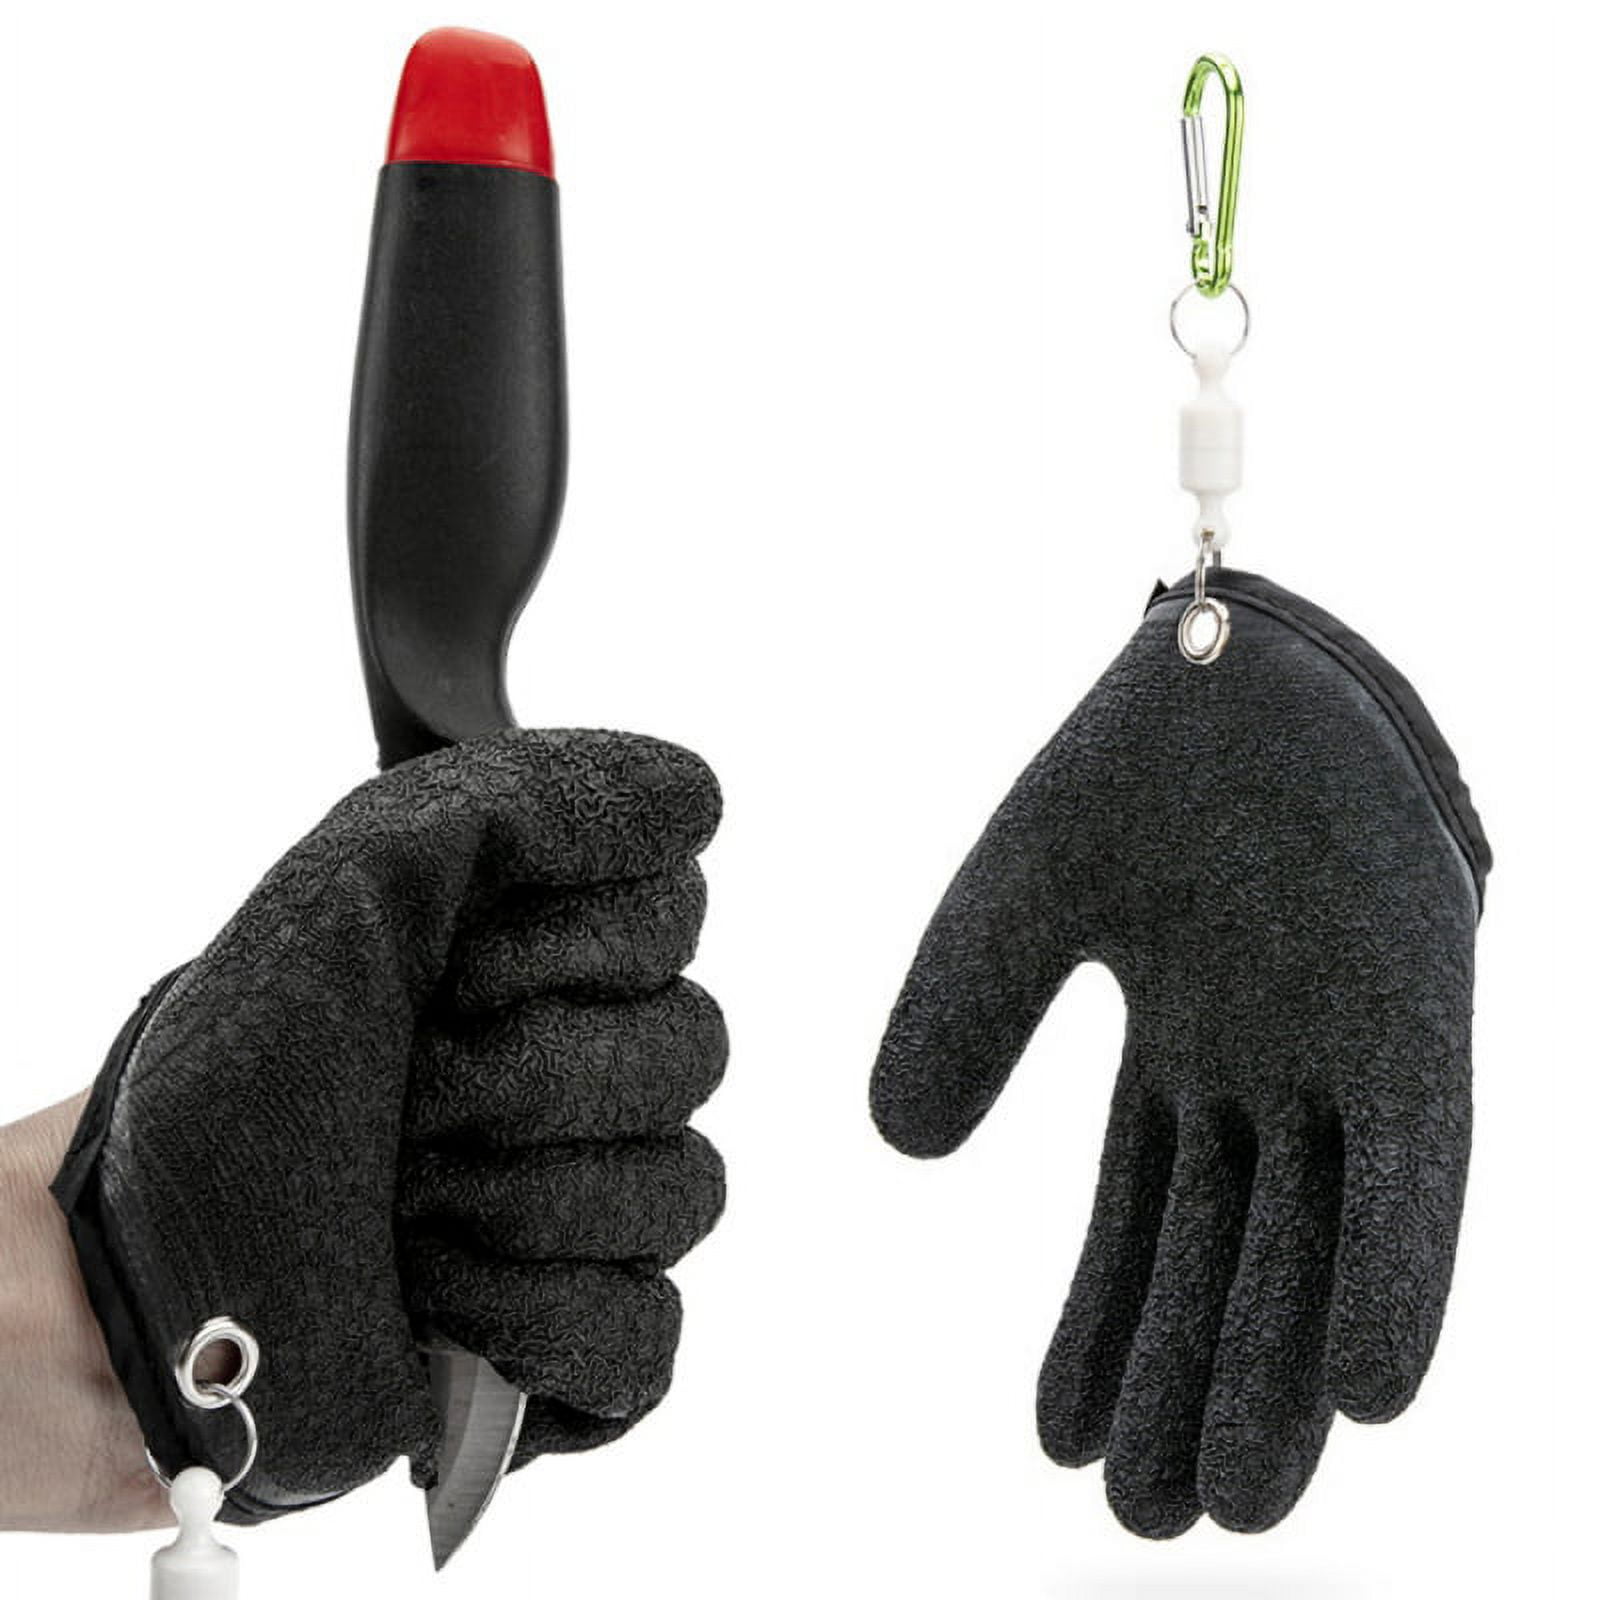 Fishing Glove With Magnet Release Fisherman Professional Catch Fish Gloves  Cut And Puncture Resistant Anti-slip Latex Fishing Gloves With Magnetic  Hooks Hunting Glove 